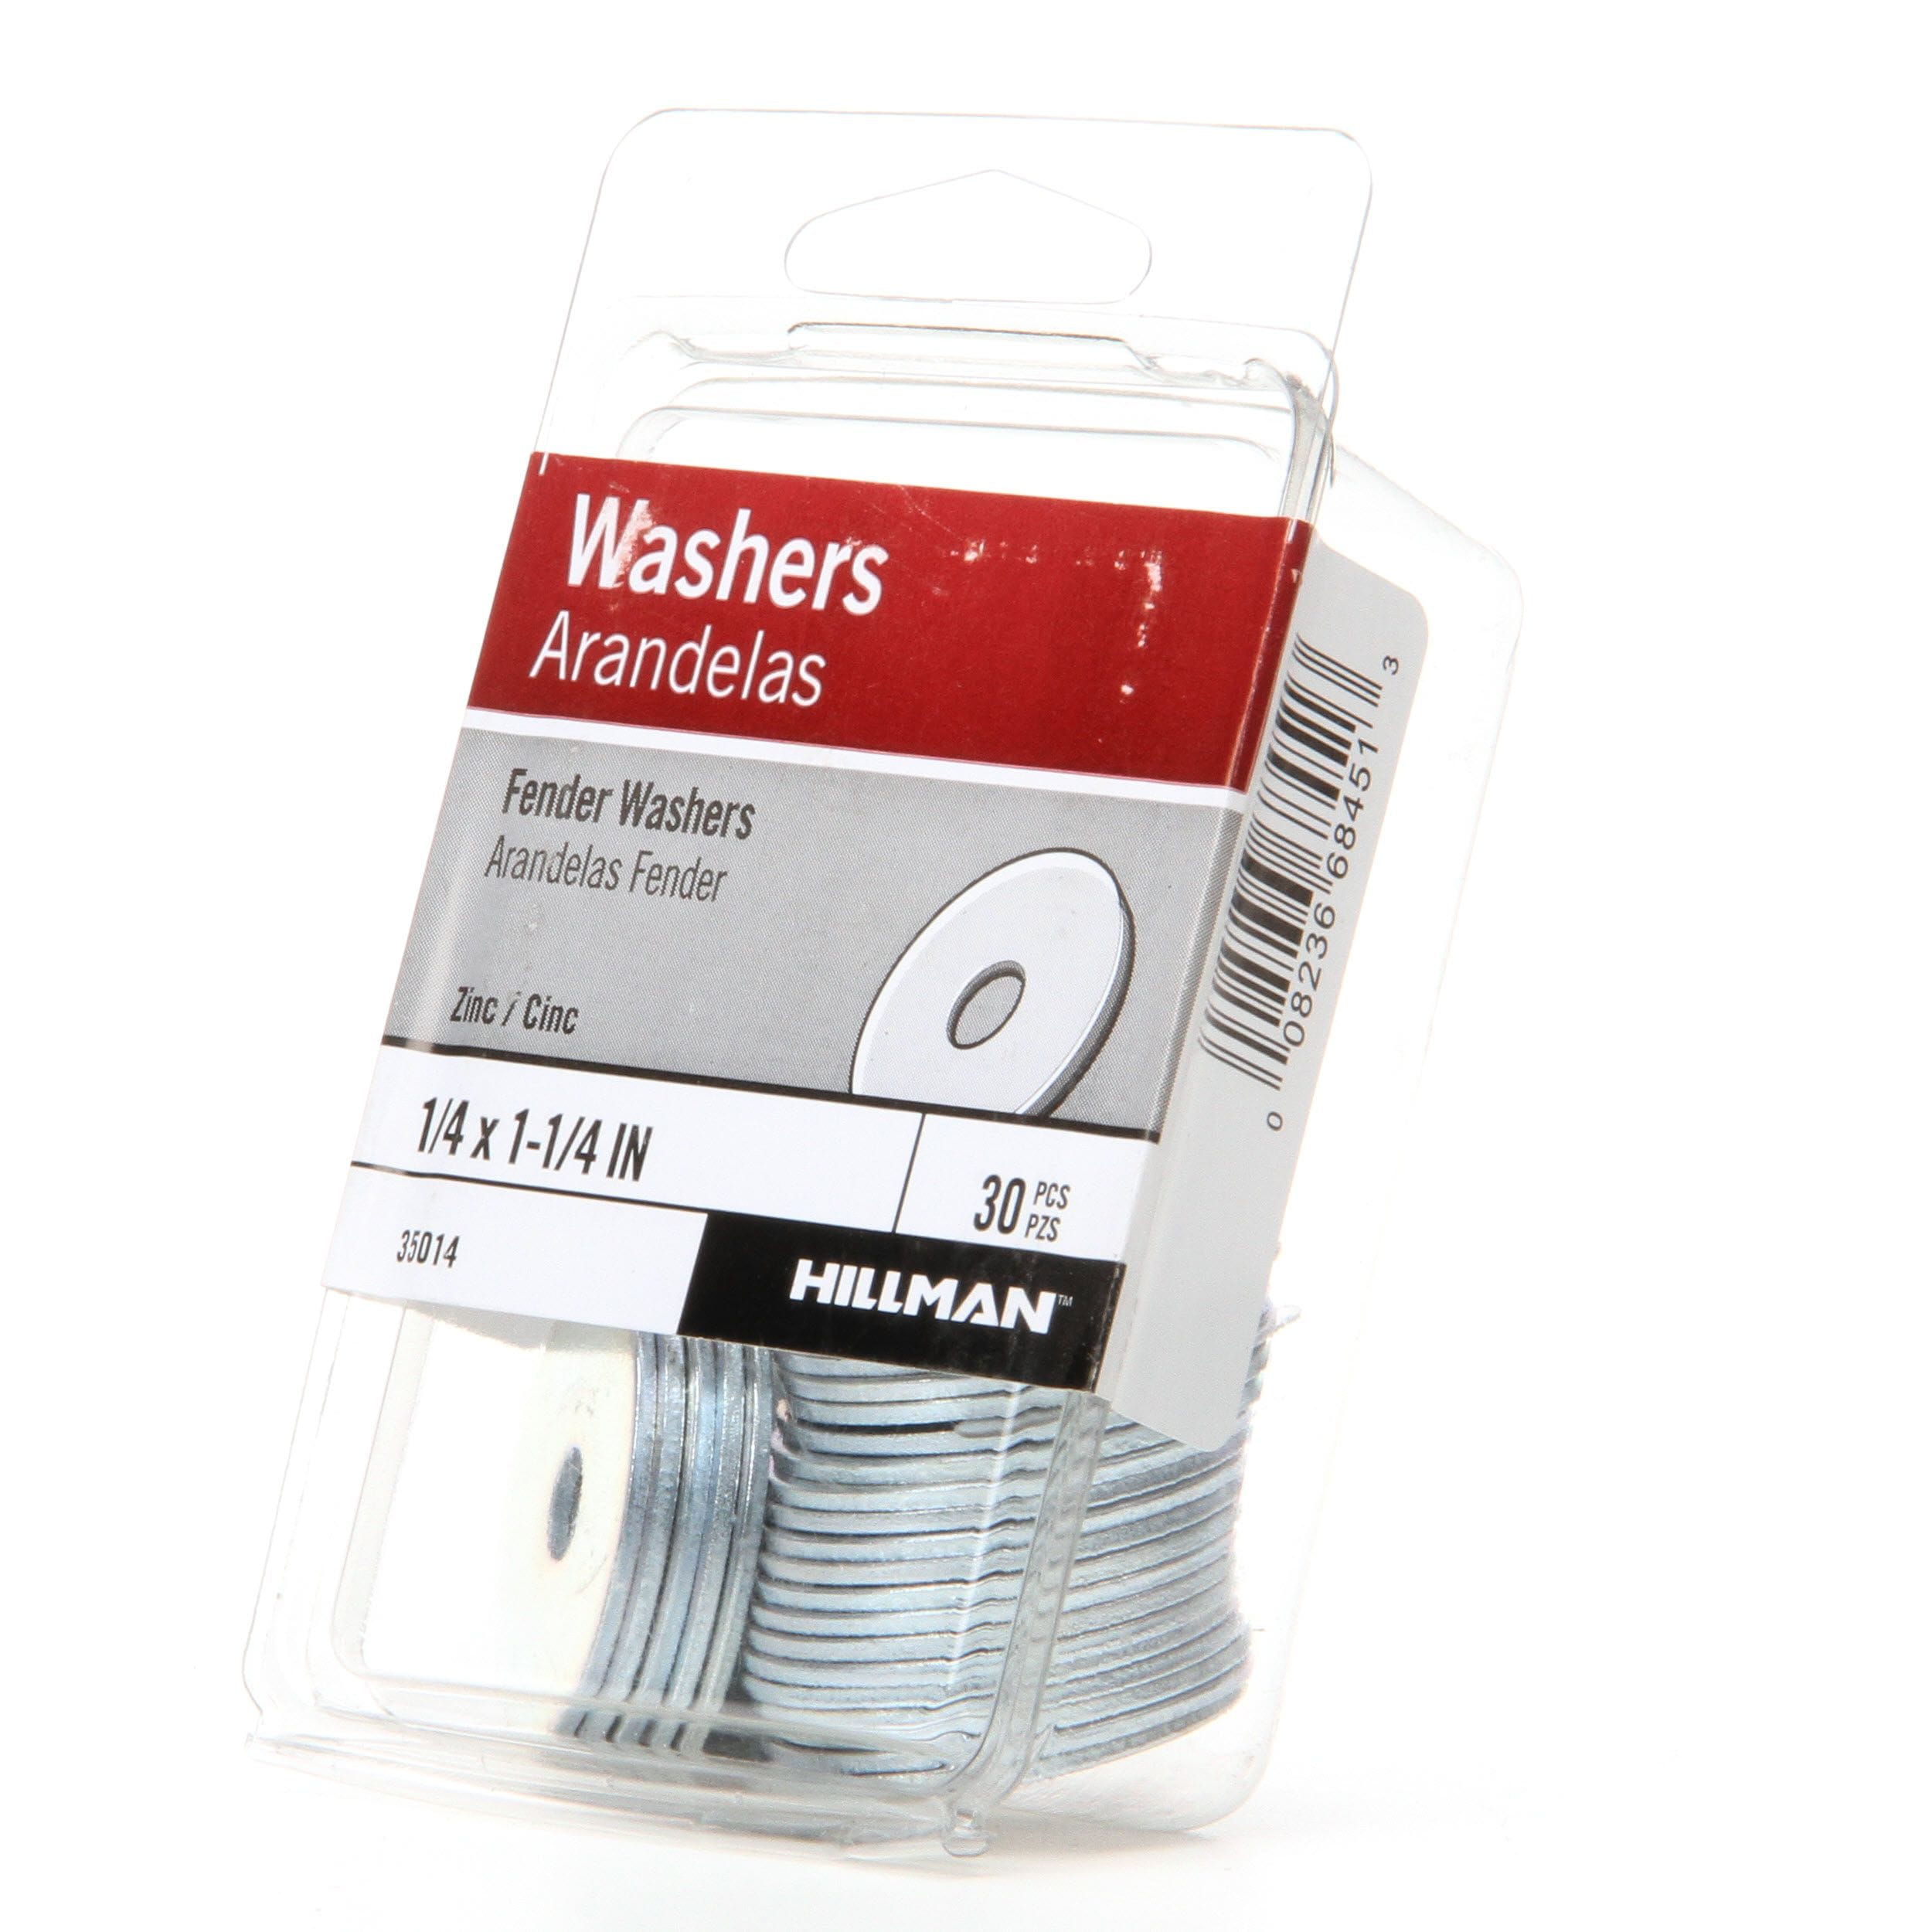 50 1/4x1-1/2 Fender Washers Stainless Steel 1/4 x 1-1/2" Large OD Washer 